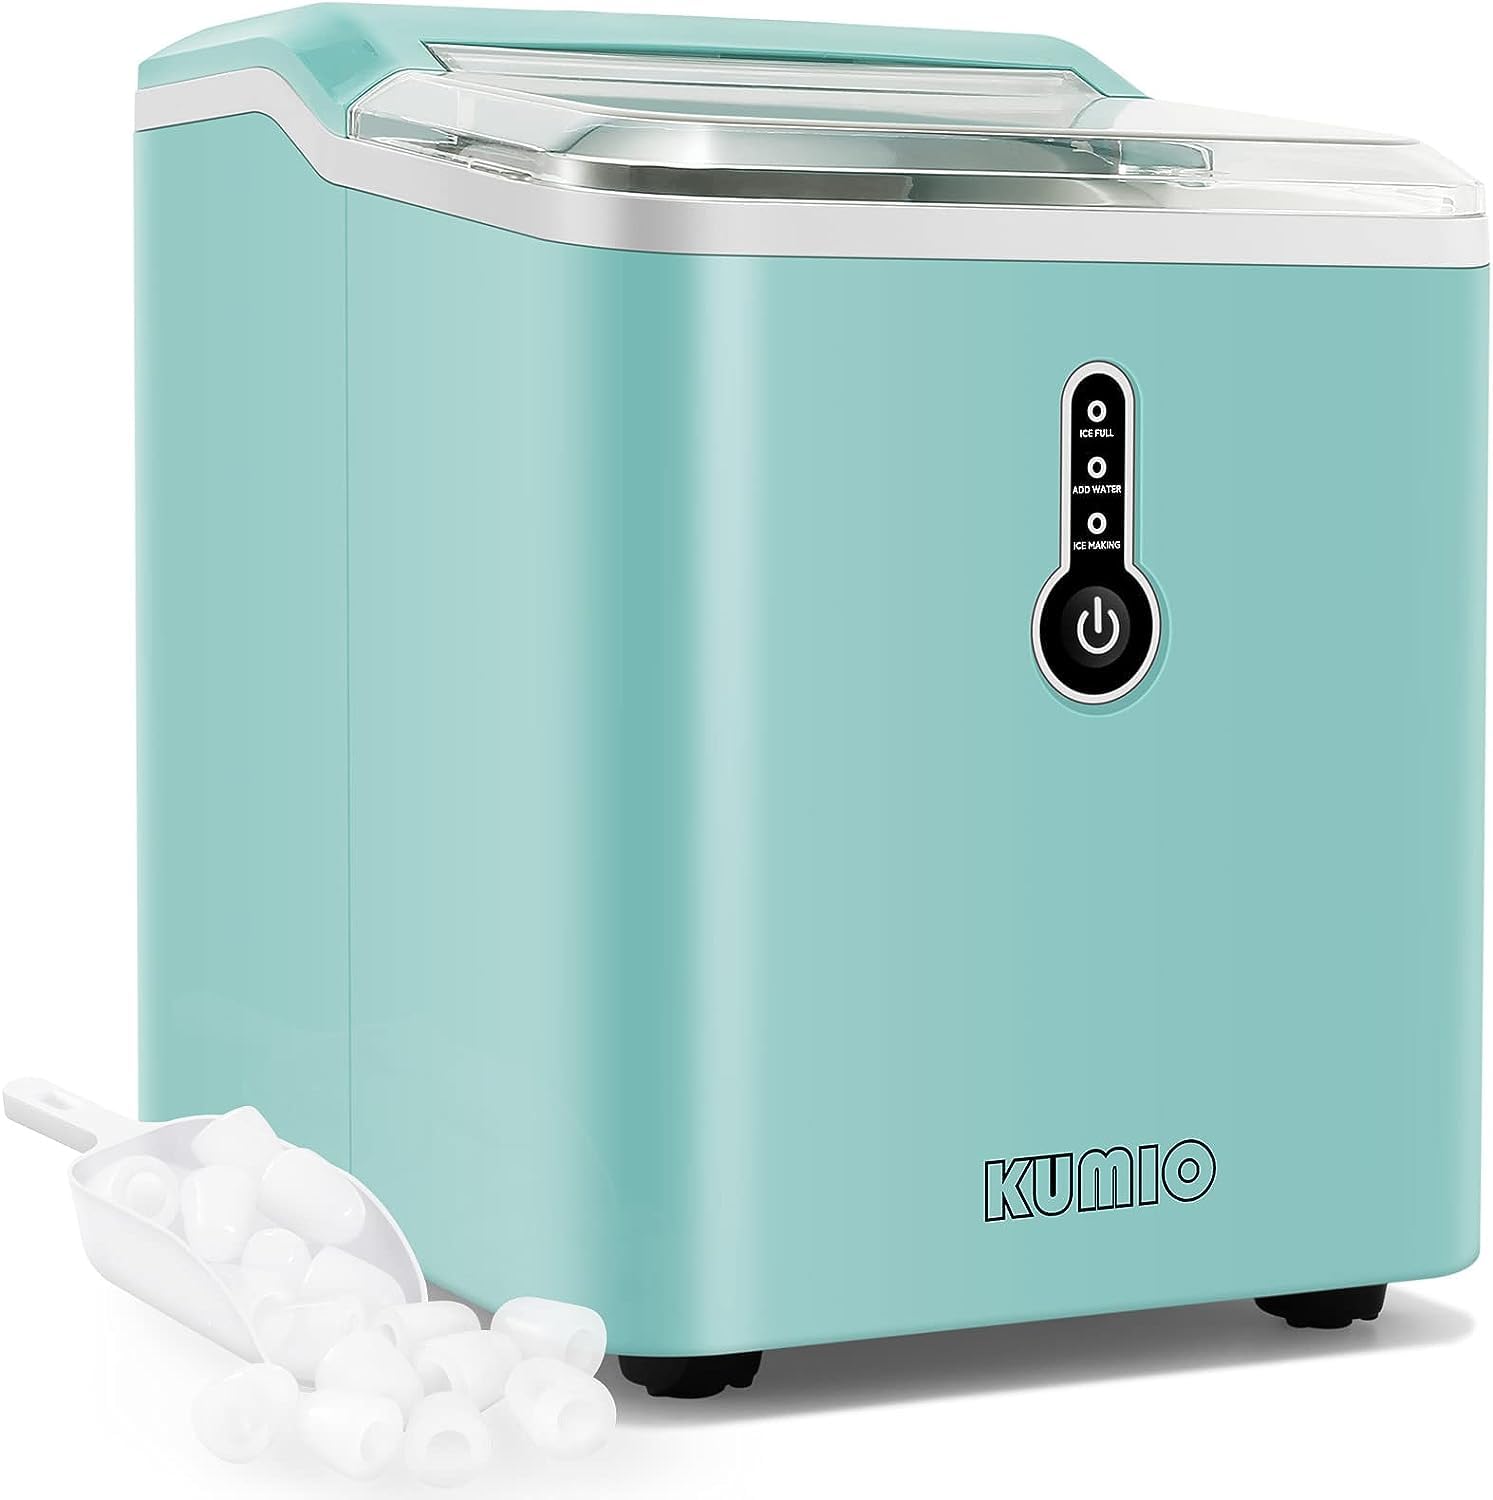 KUMIO Ice Makers Countertop, 9 Bullet Ice in 6-9 Mins with Ice Scoop and Basket, 26.5 Lbs per Day, Portable Ice Maker for Home Office Camping Party RV, Blue